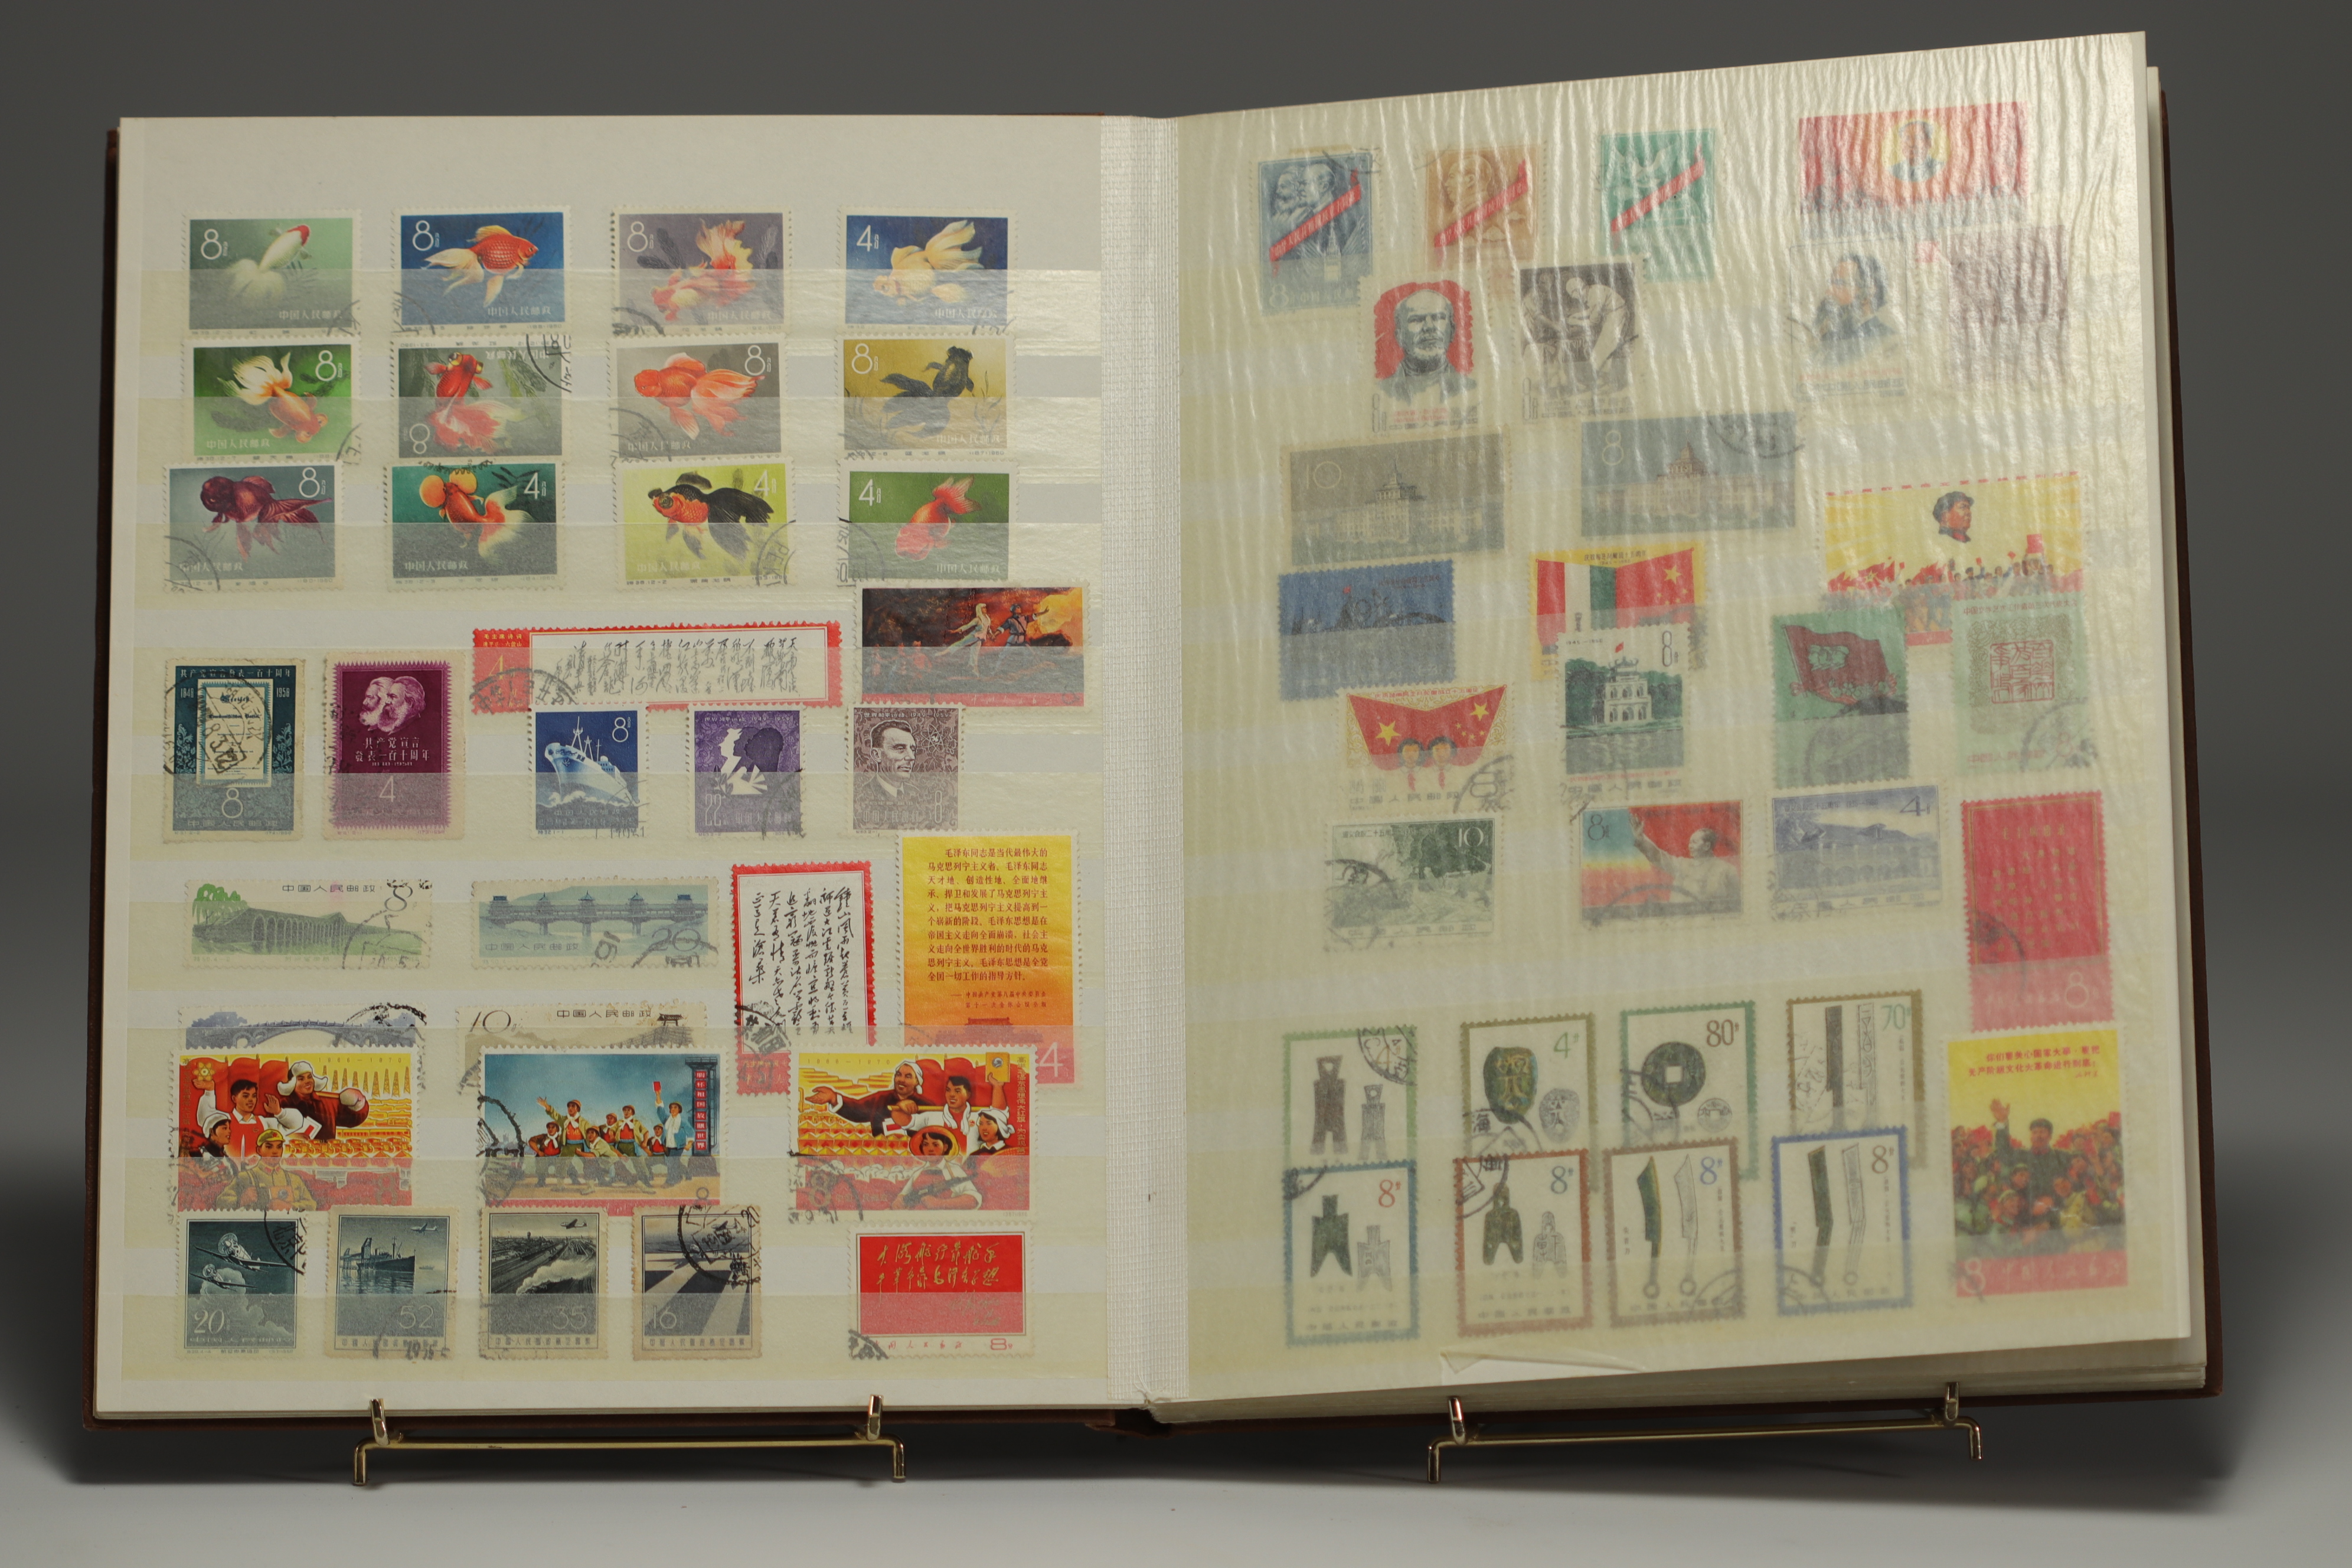 Set of 30 albums of world stamps, China, Japan, Middle East, Europe, etc. (Lot 2) - Image 17 of 22